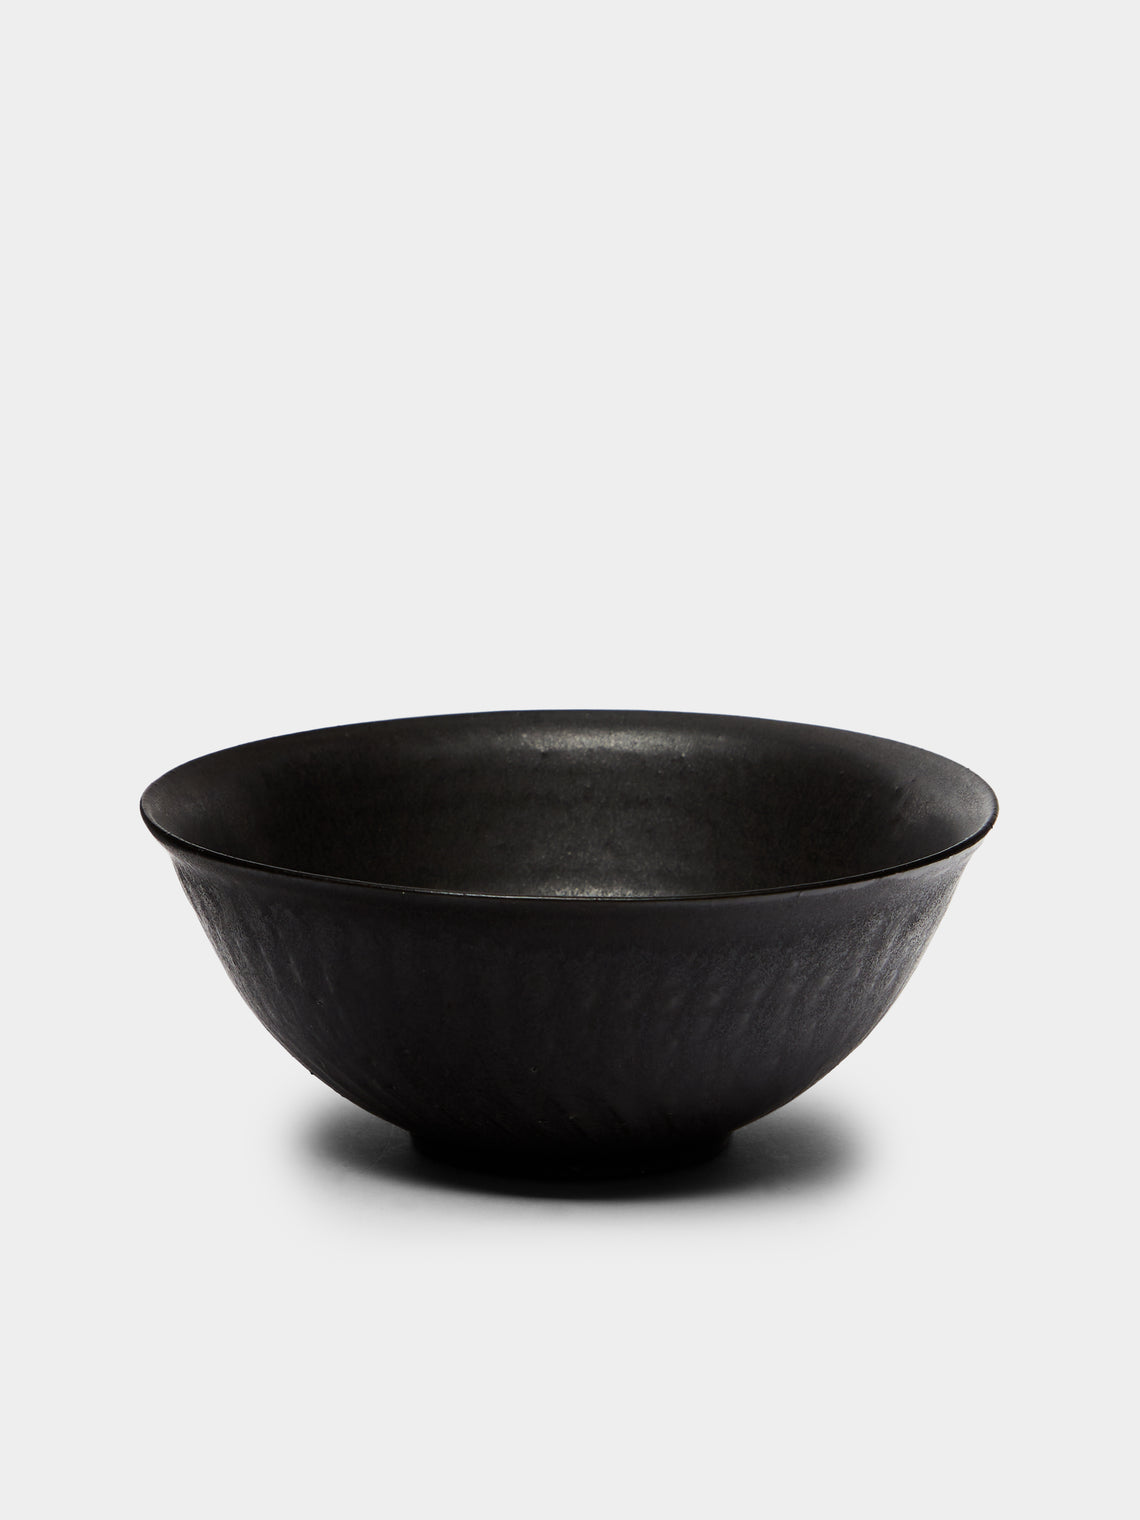 Lee Song-am - Black Clay Bowls (Set of 4) -  - ABASK - 